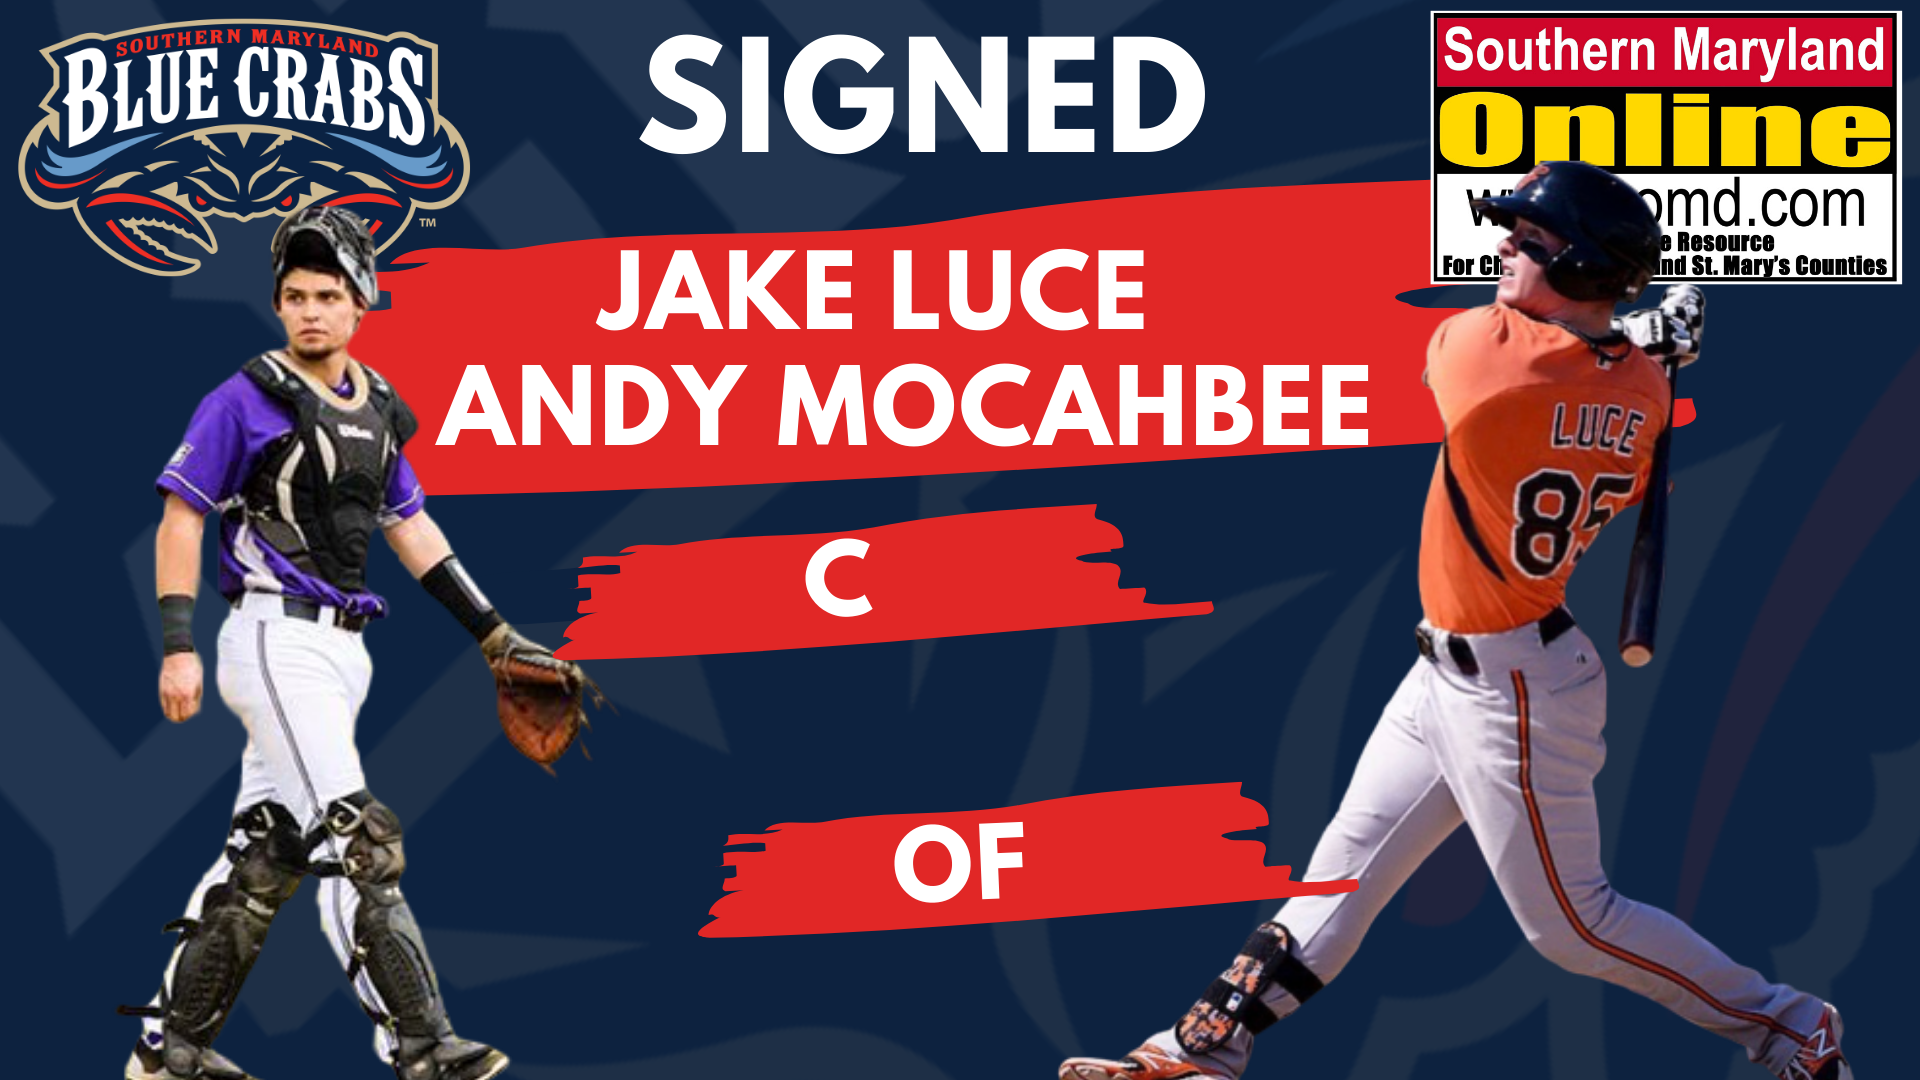 Blue Crabs Sign Founder of Luce Prospect Group, Jake Luce, and Andy Mocahbee 